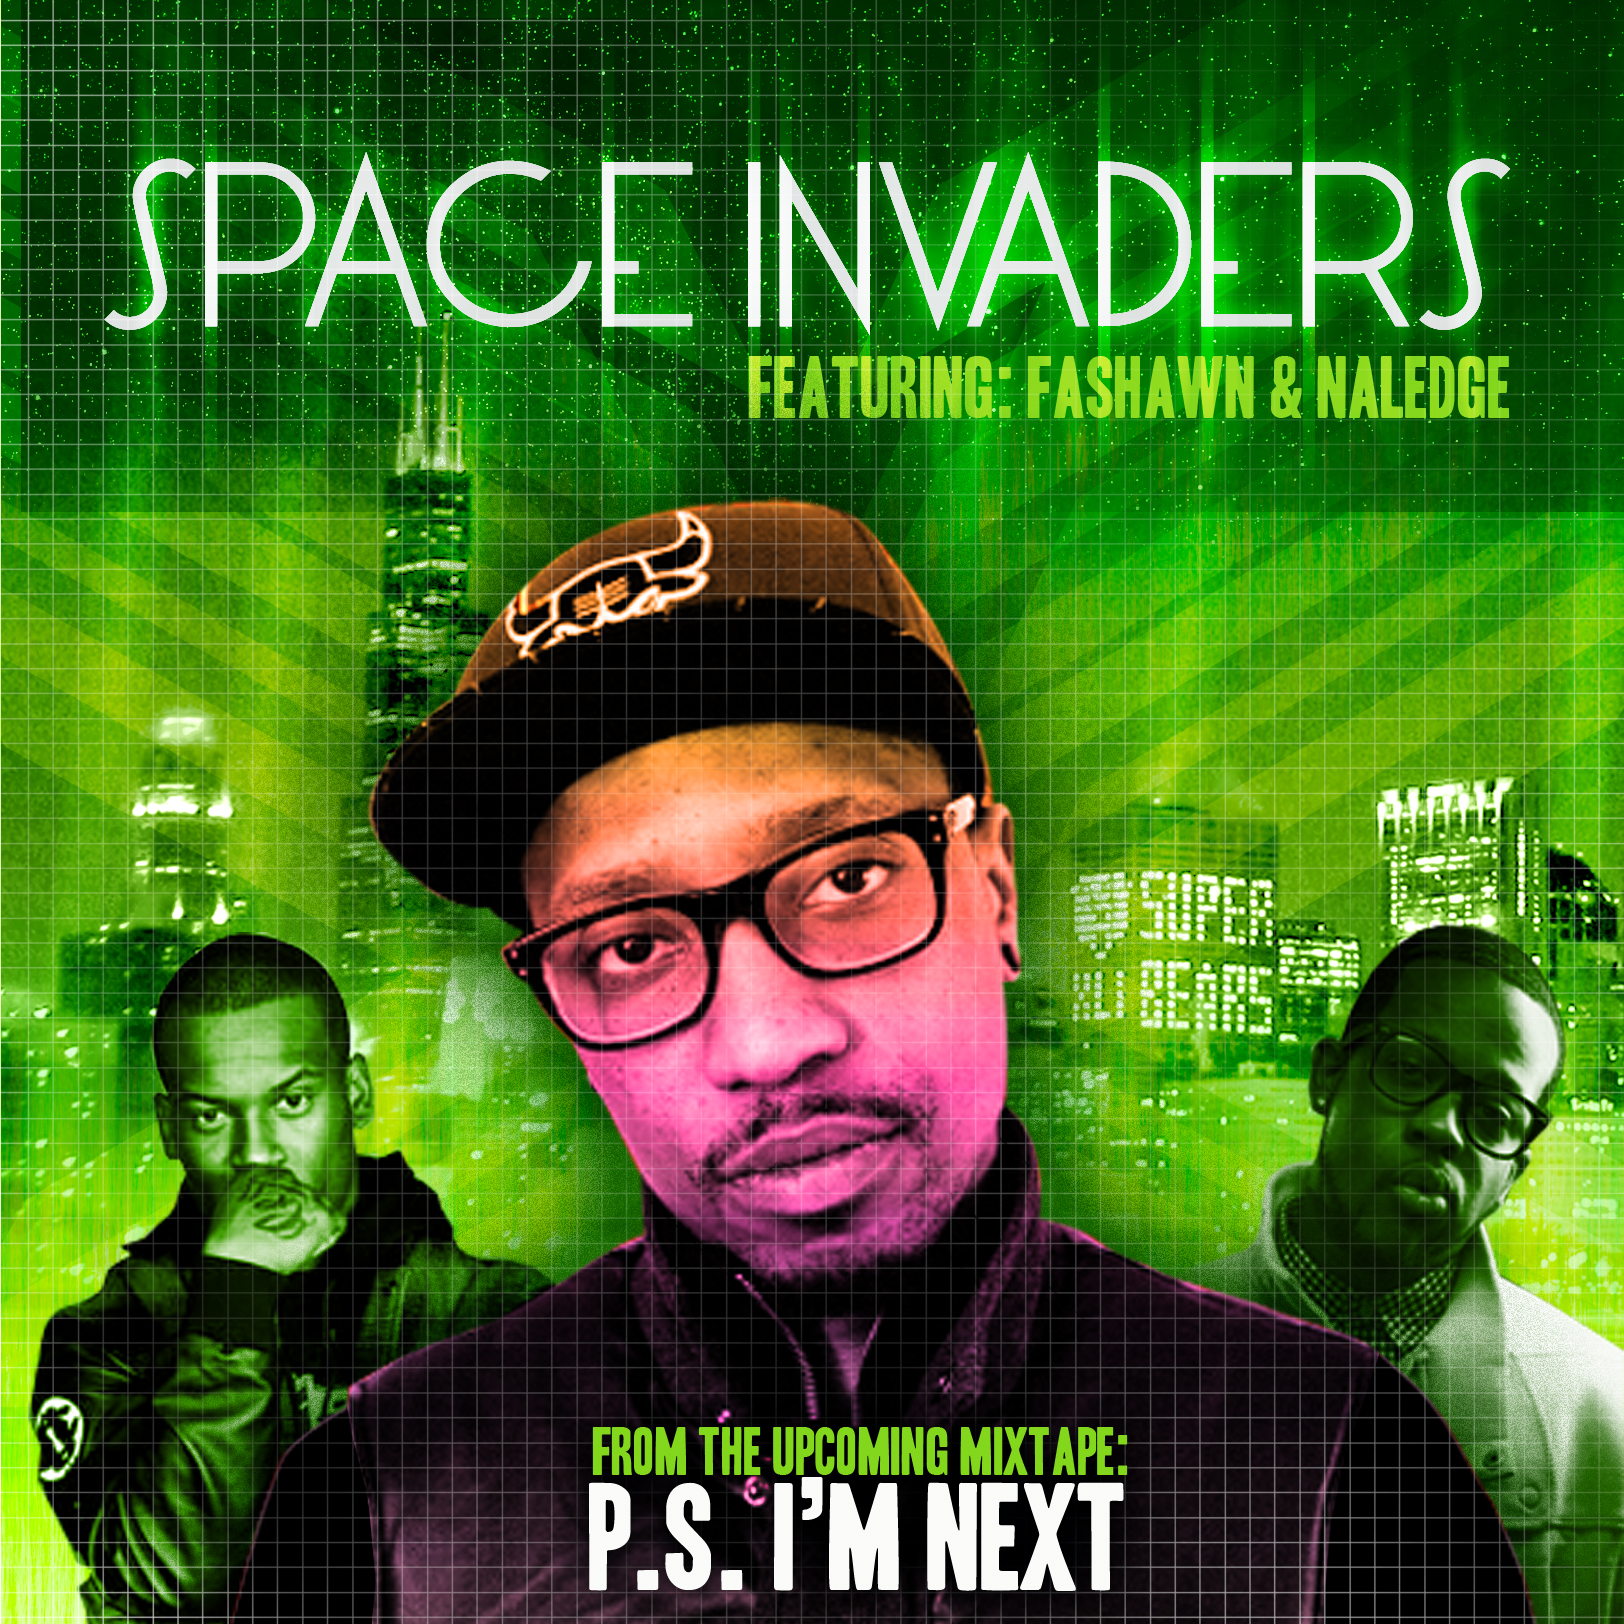 ADaD - "Space Invaders" ft. Fashawn & Naledge